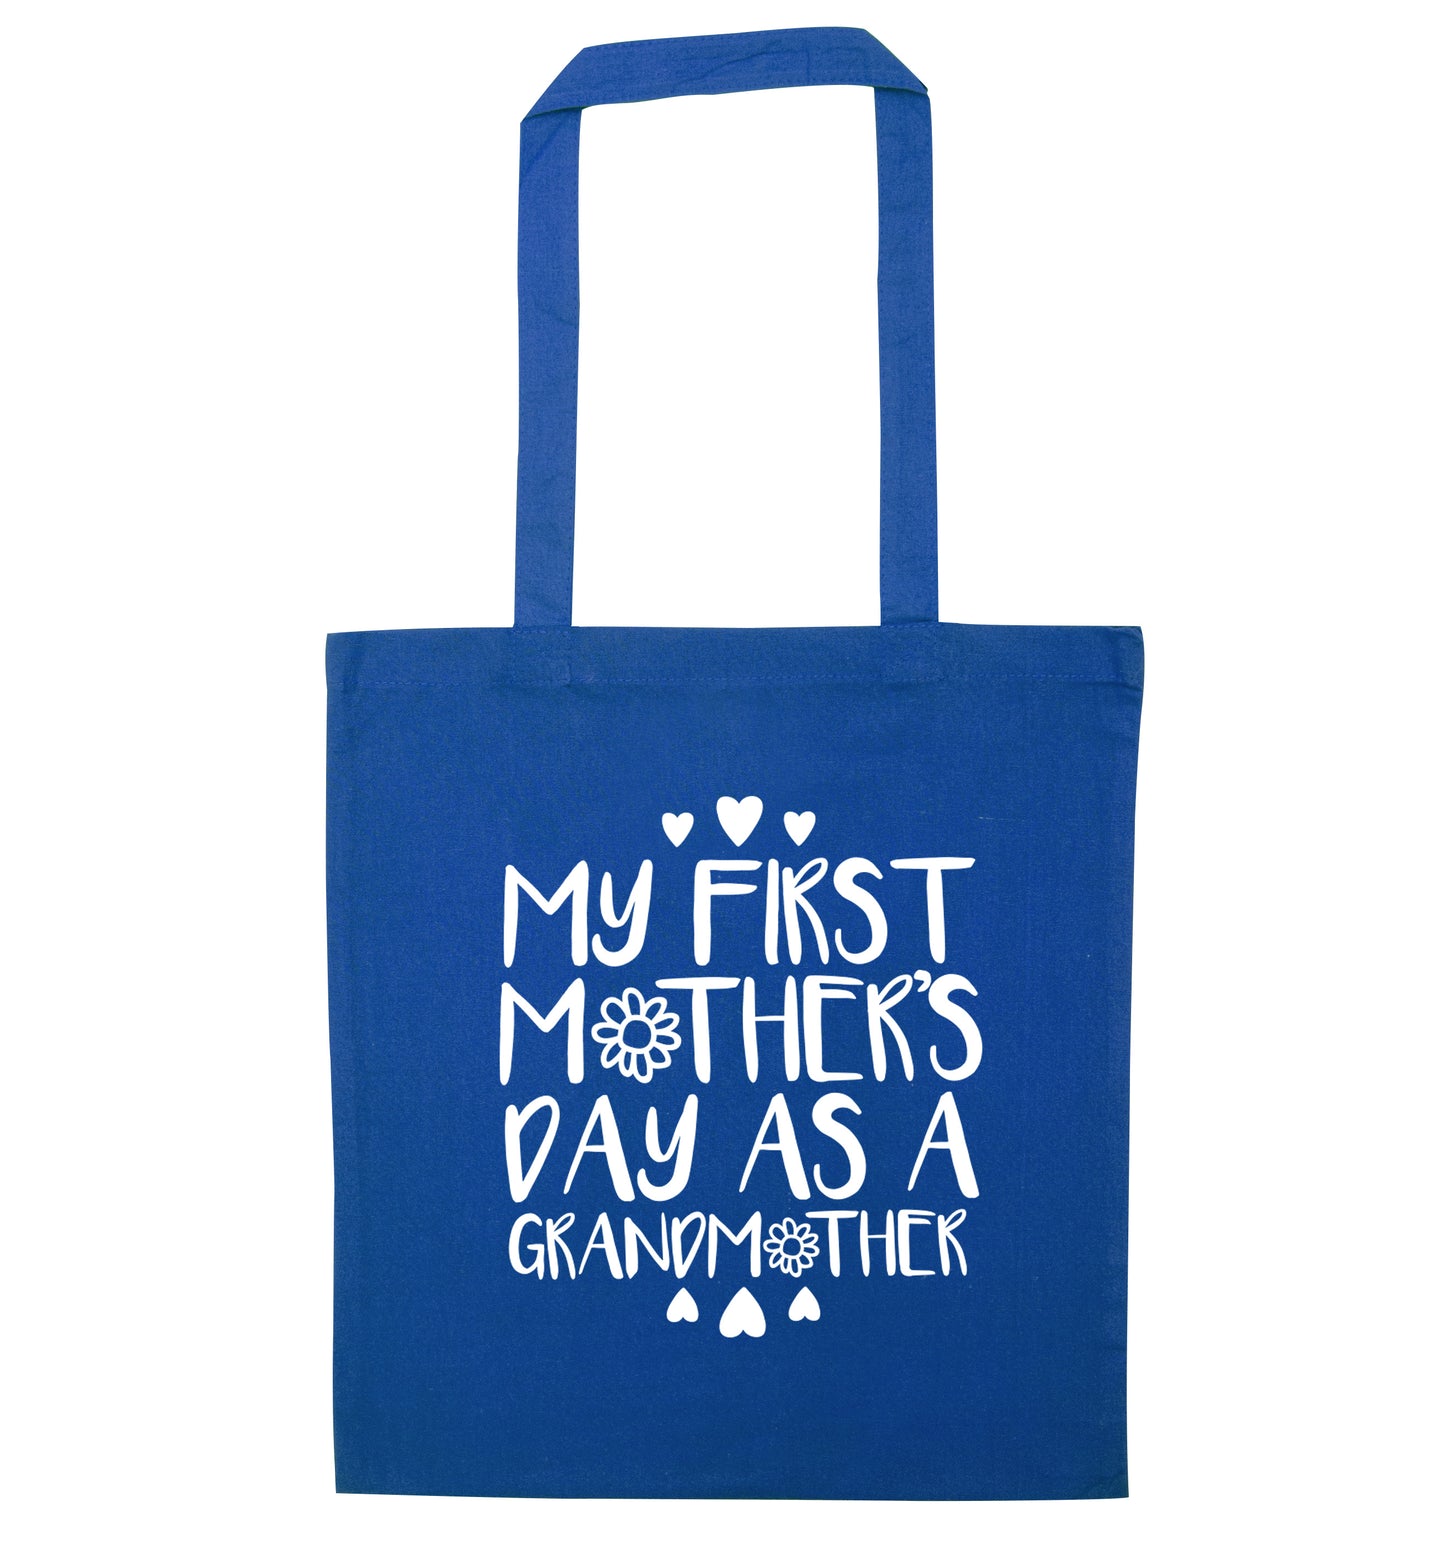 My first mother's day as a grandmother blue tote bag